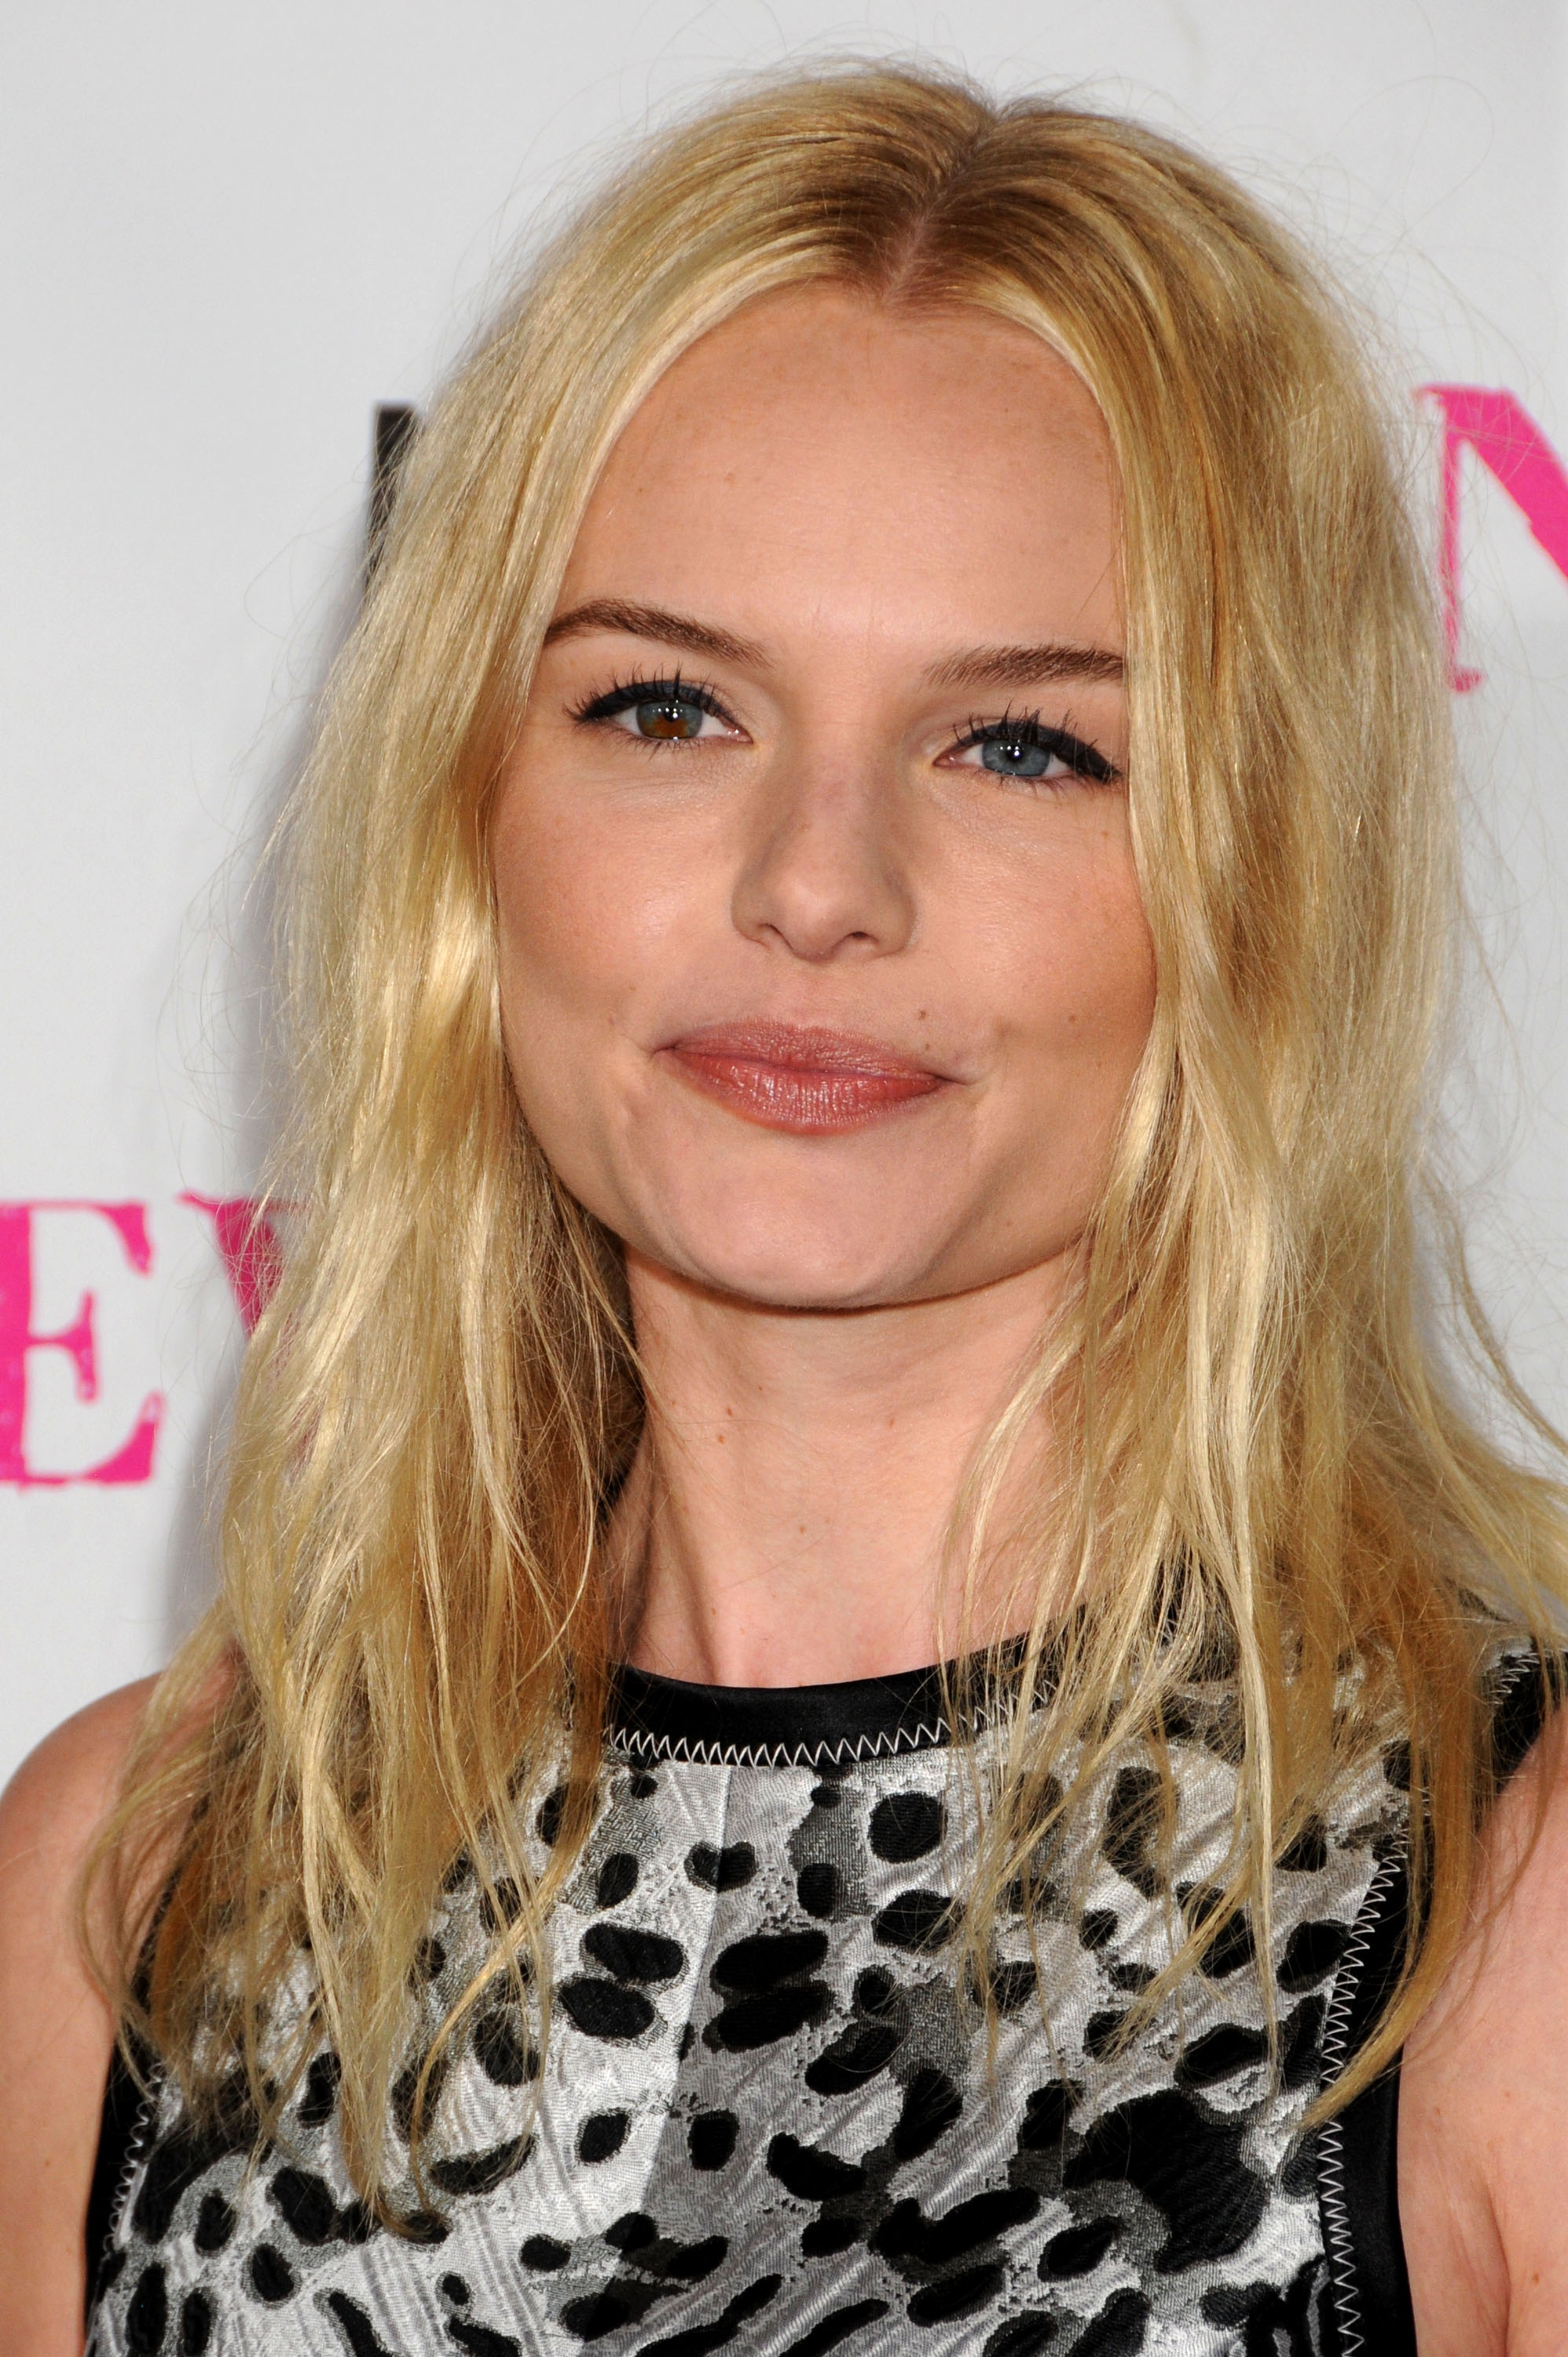 Kate Bosworth photo 314 of 1928 pics, wallpaper - photo #215712 - ThePlace2